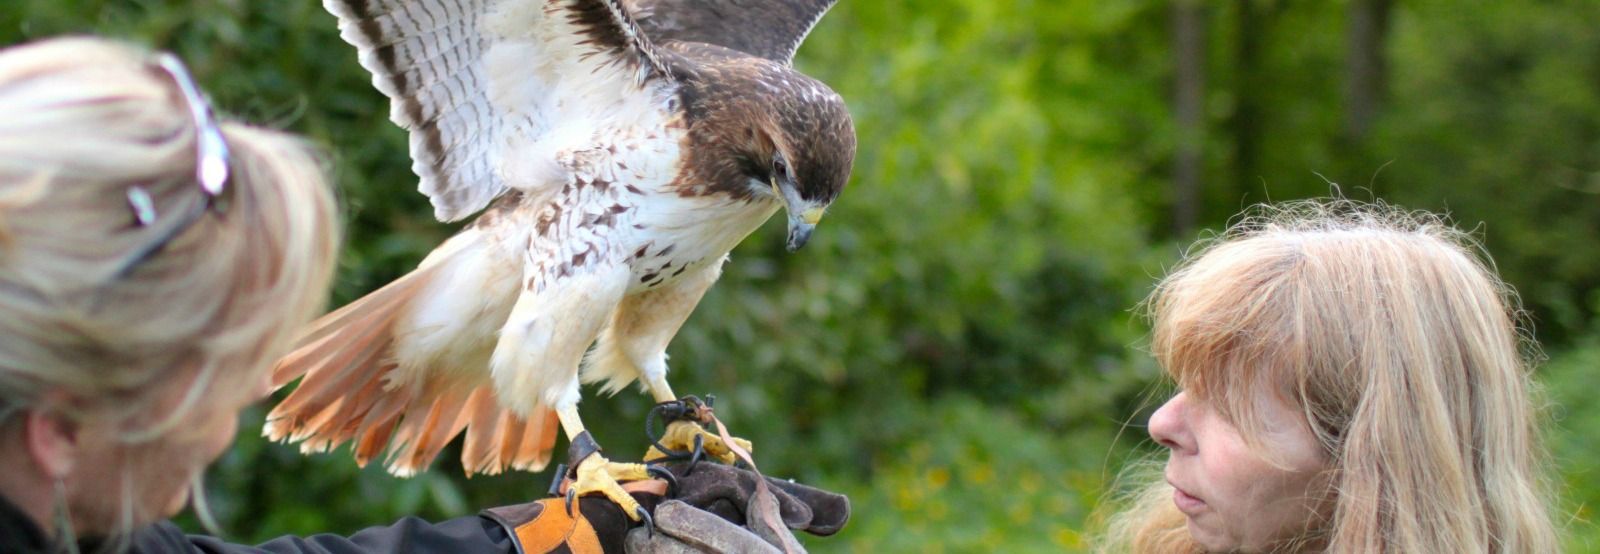 Falconry on-site